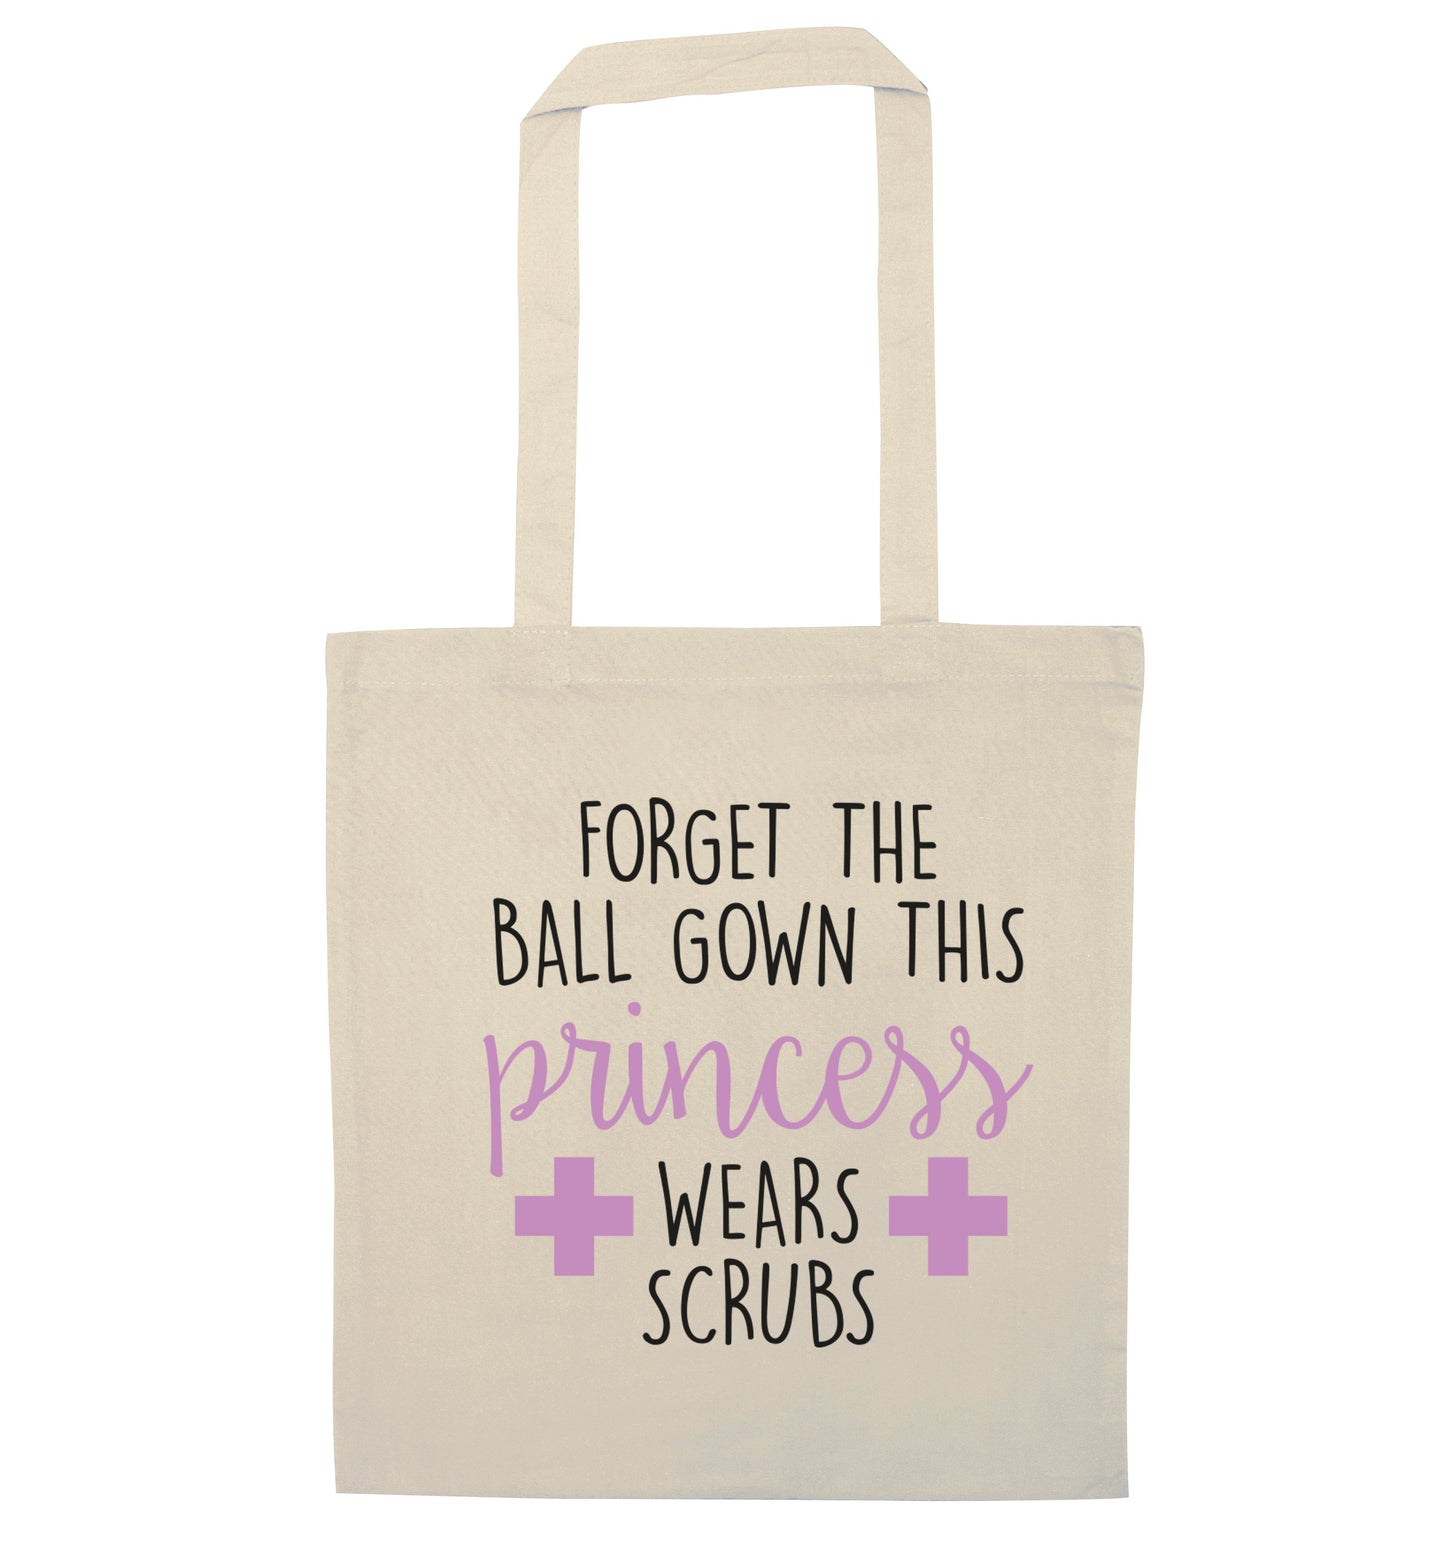 Forget the ball gown this princess wears scrubs natural tote bag